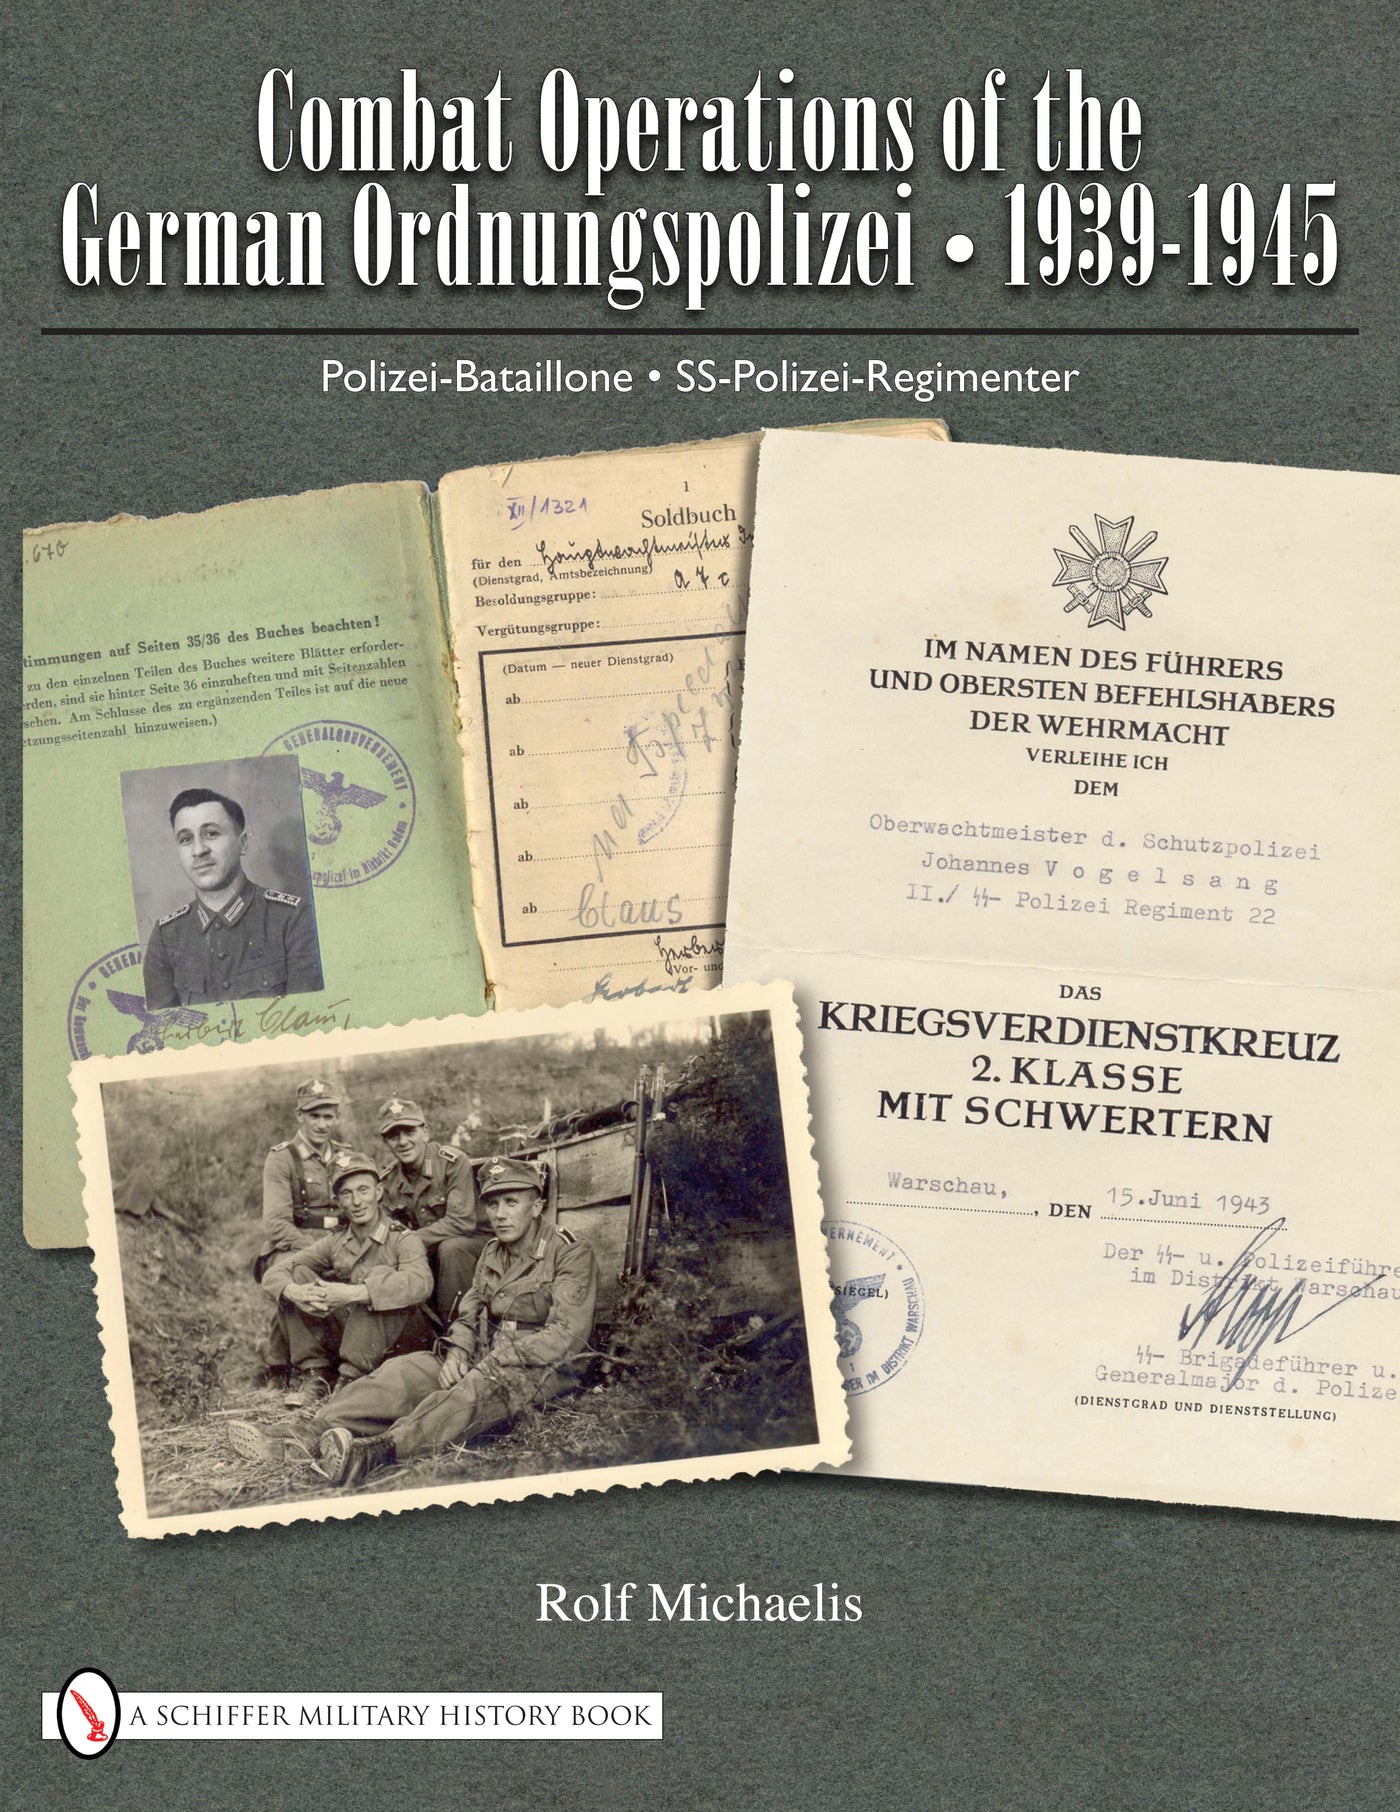 Combat Operations of the German Ordnungspolizei, 1939-1945